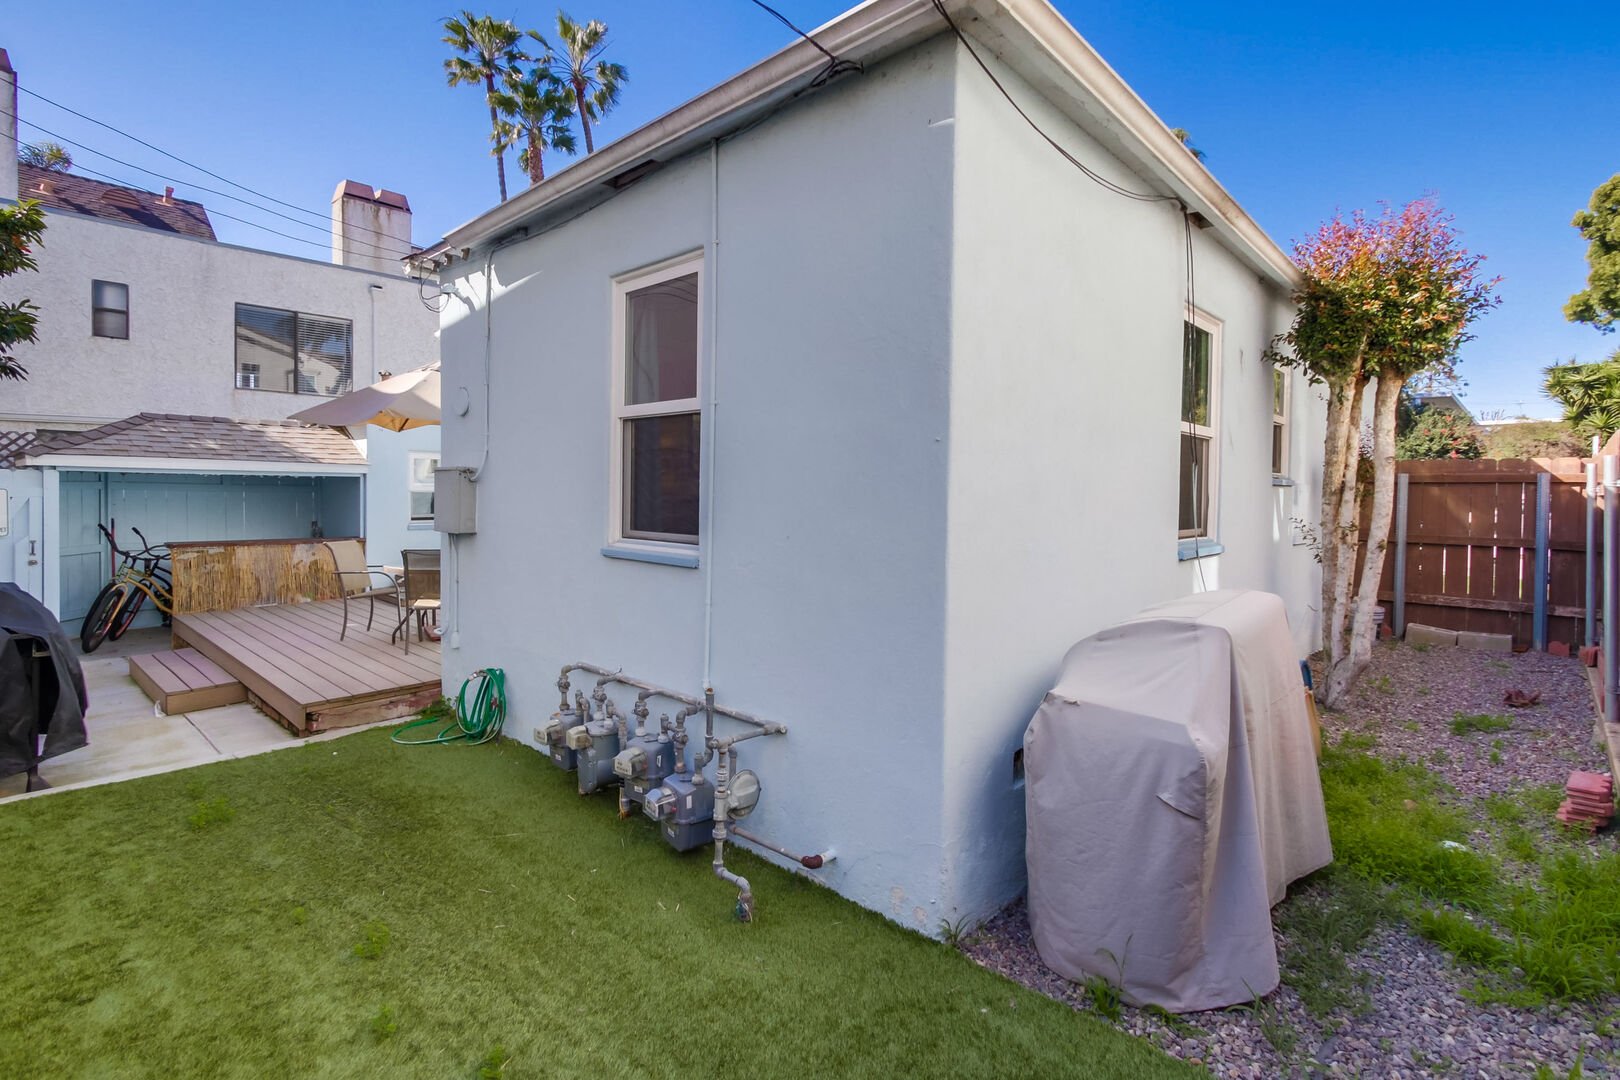 Side patio yard with BBQ, fully enclosed and welcome to furry friends!